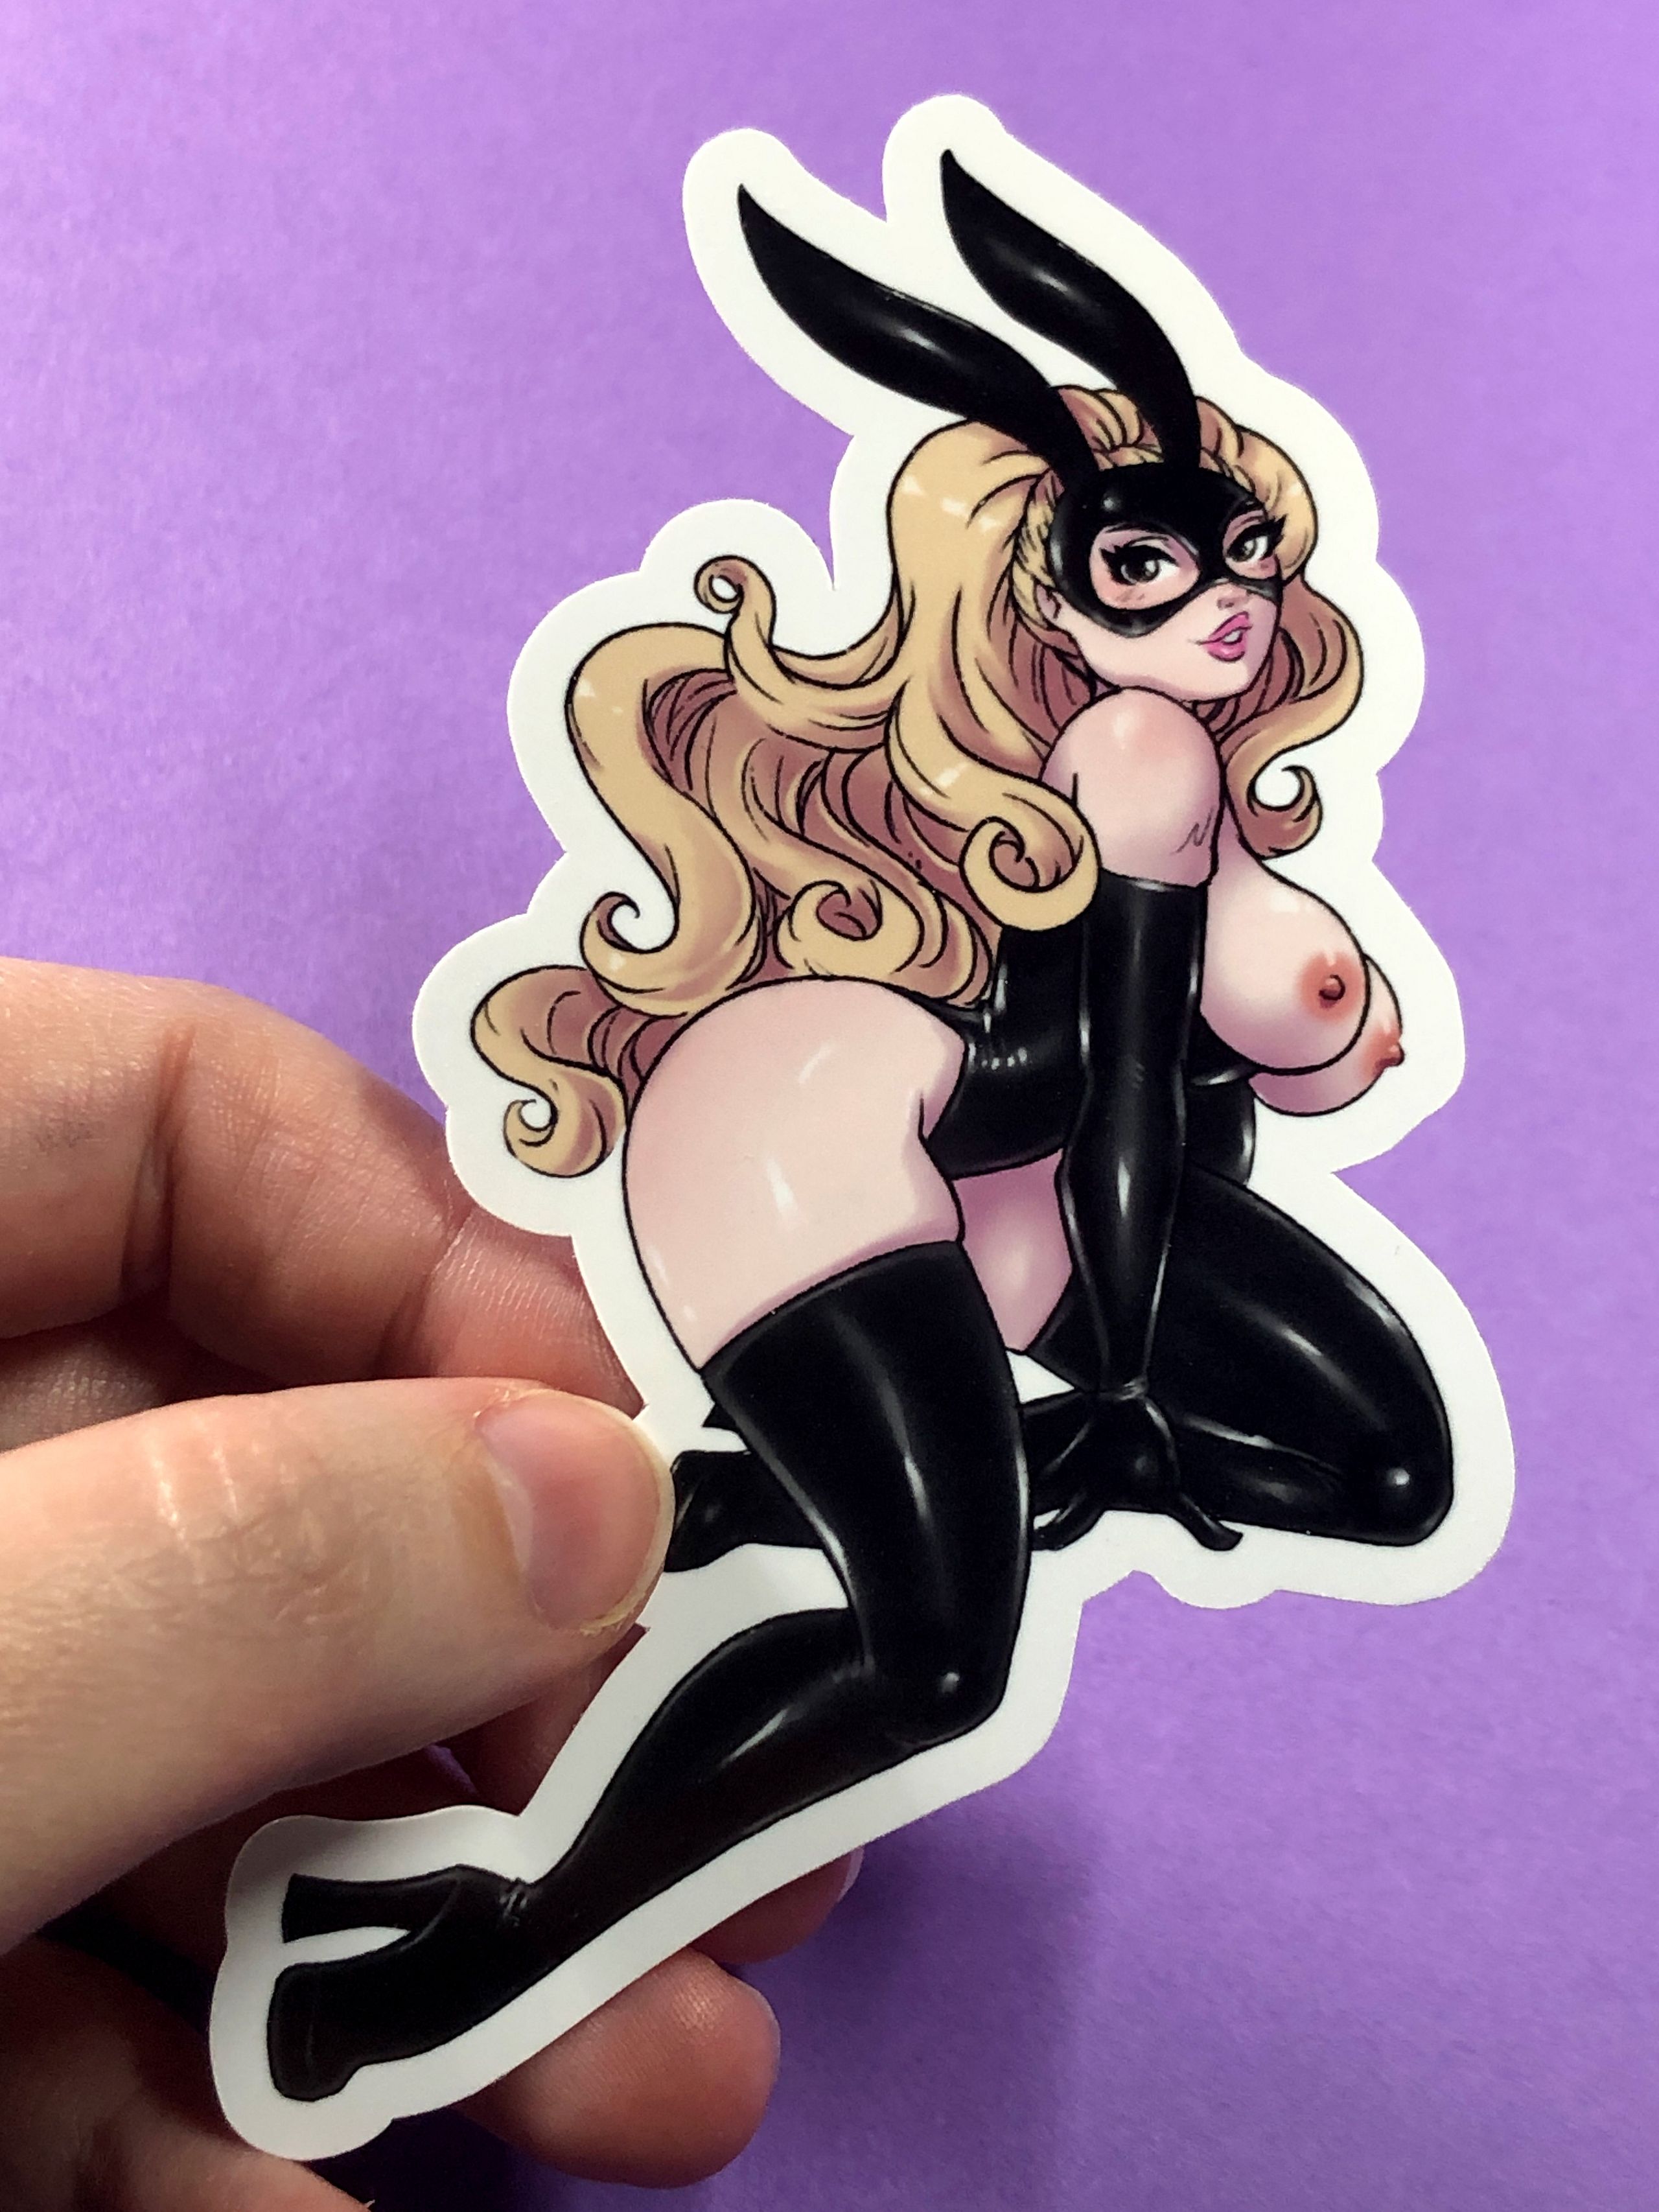 Naughty Bunny Babe NSFW Adult Nudie Sticker